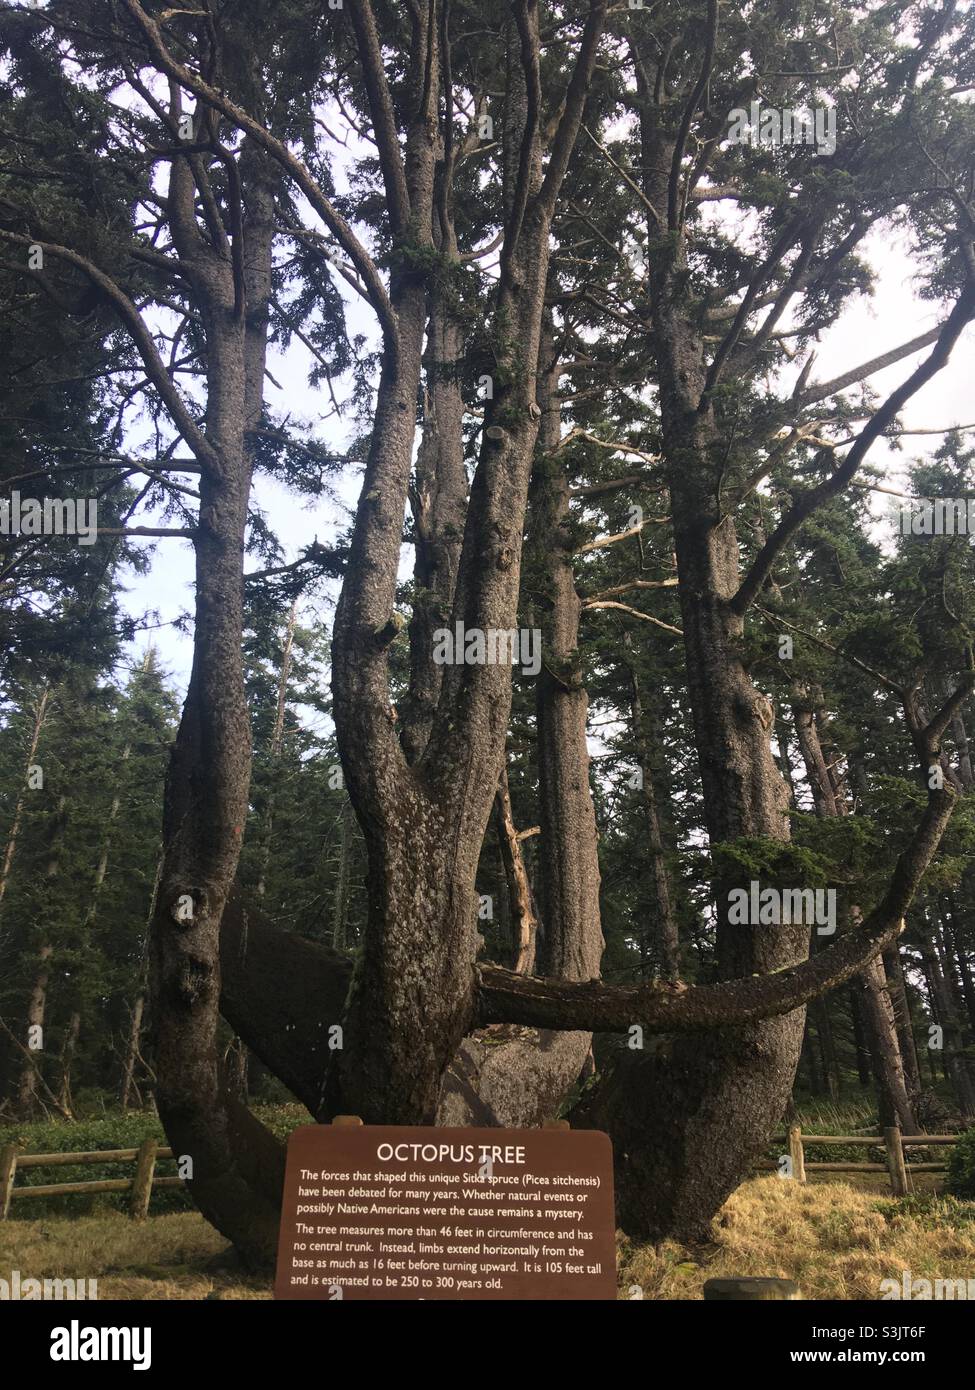 Octopus Tree at Cape Meares State Scenic Viewpoint and National Wildlife Refuge Tillamook Oregon Stock Photo